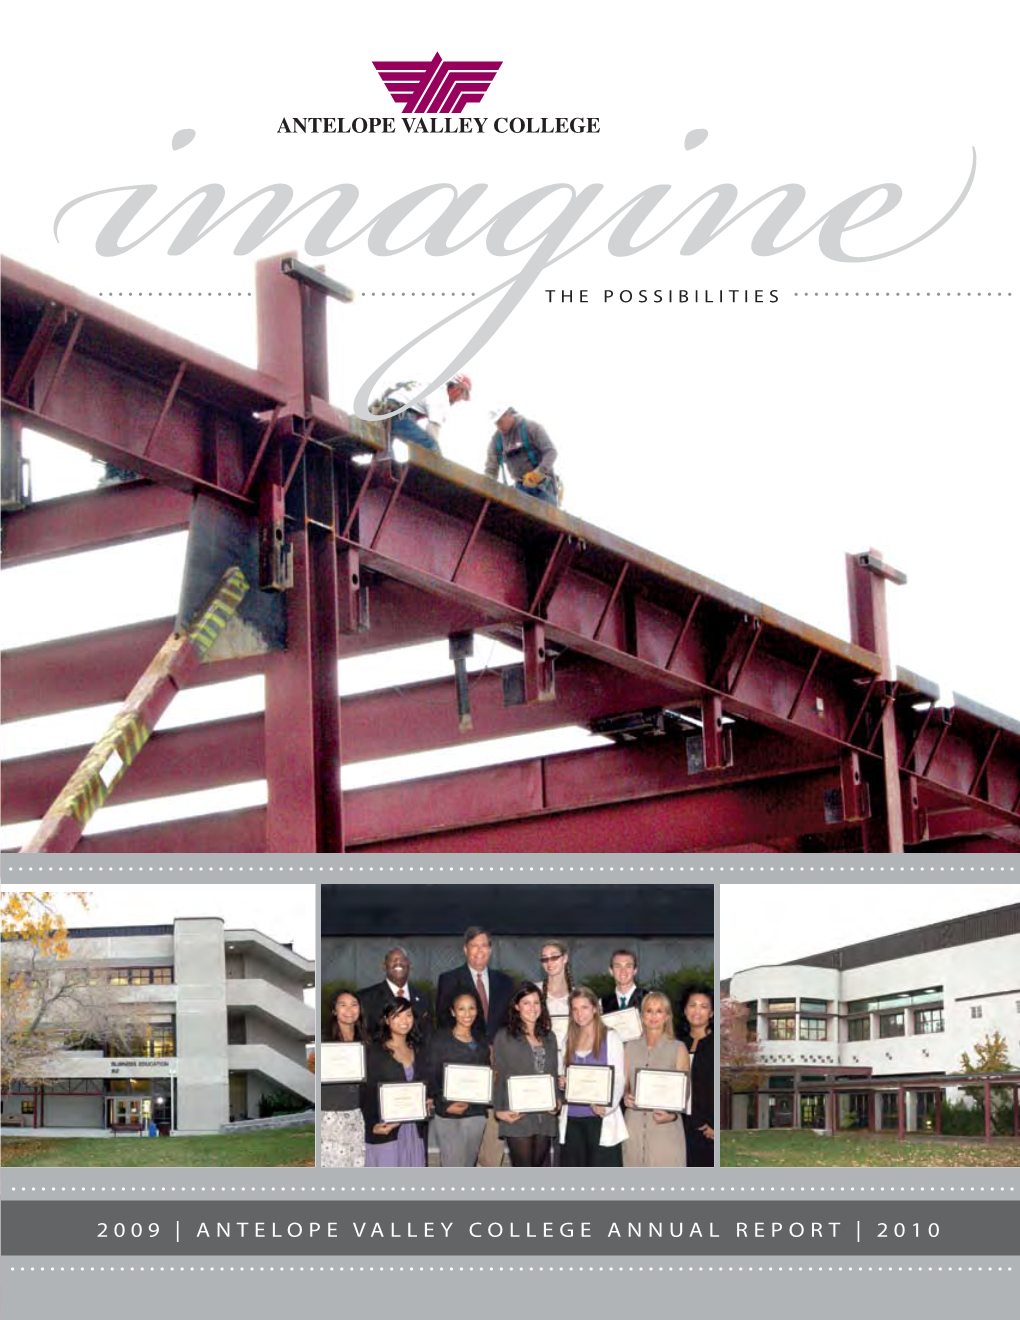 2009 | ANTELOPE VALLEY COLLEGE ANNUAL REPORT | 2010 Perspective on the Year 2009 | 2010